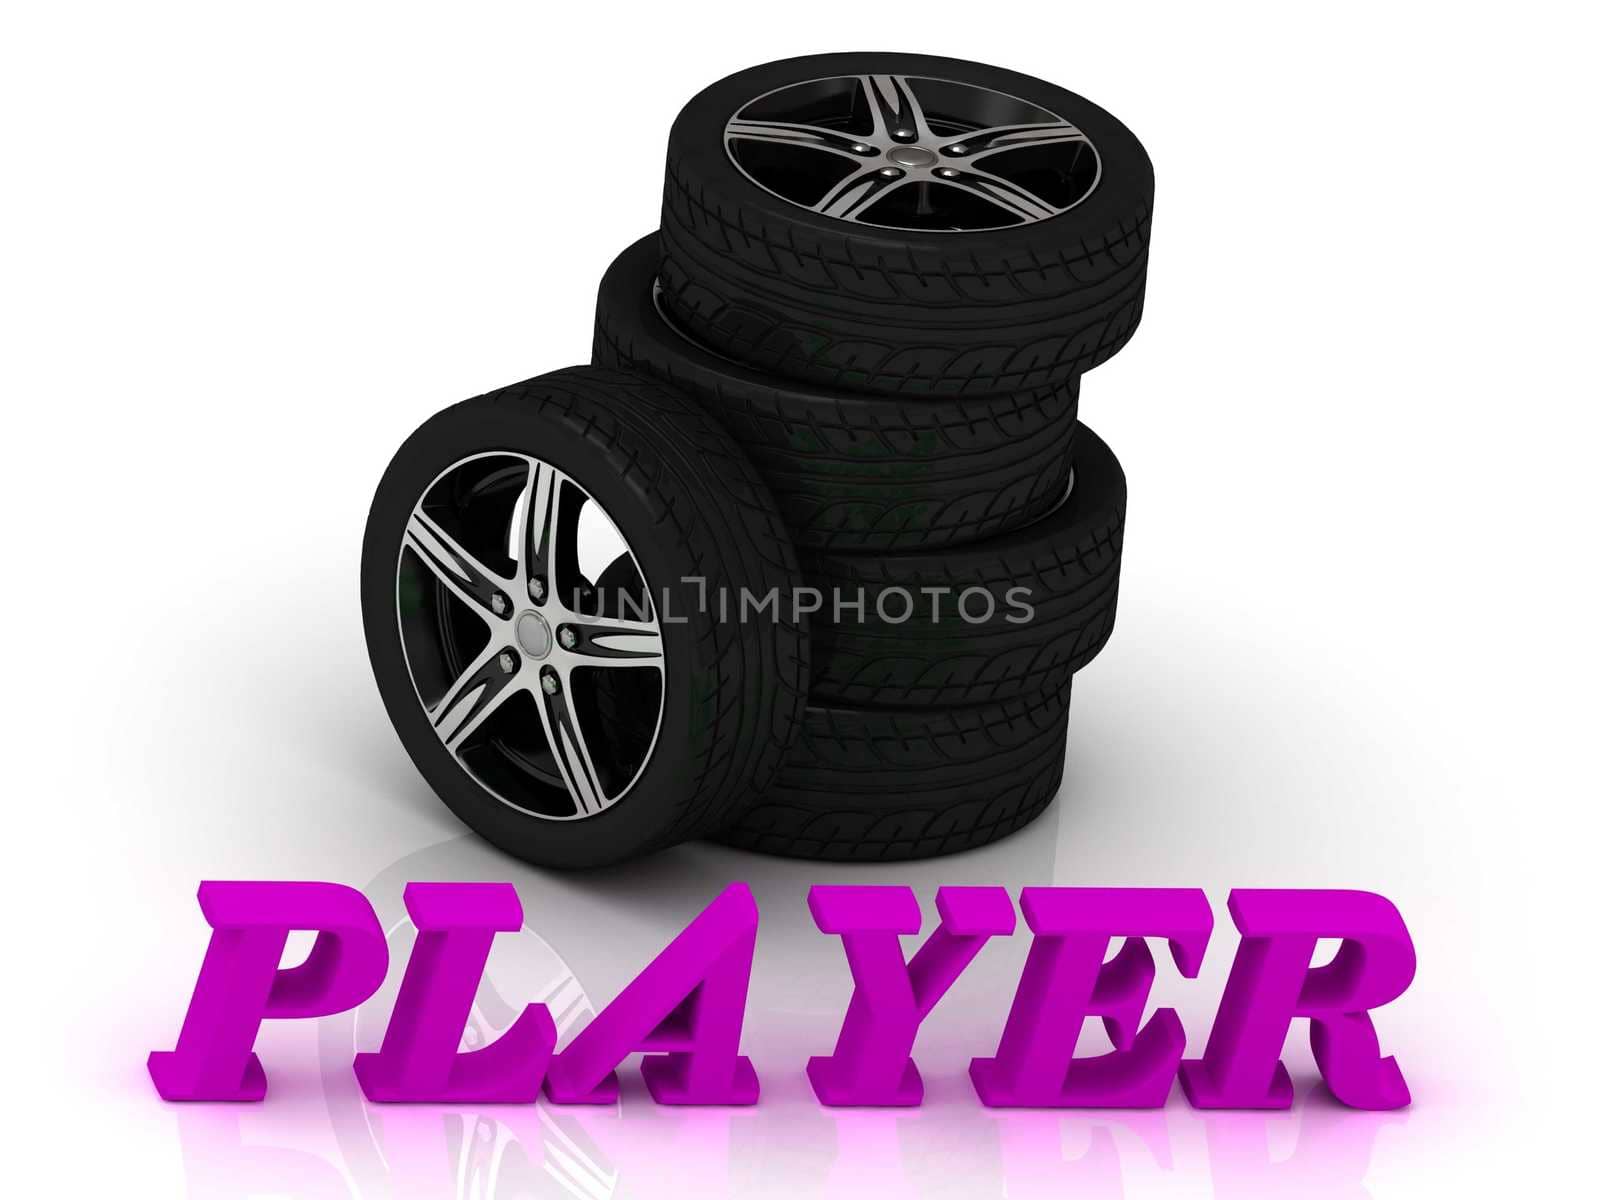 PLAYER- bright letters and rims mashine black wheels by GreenMost